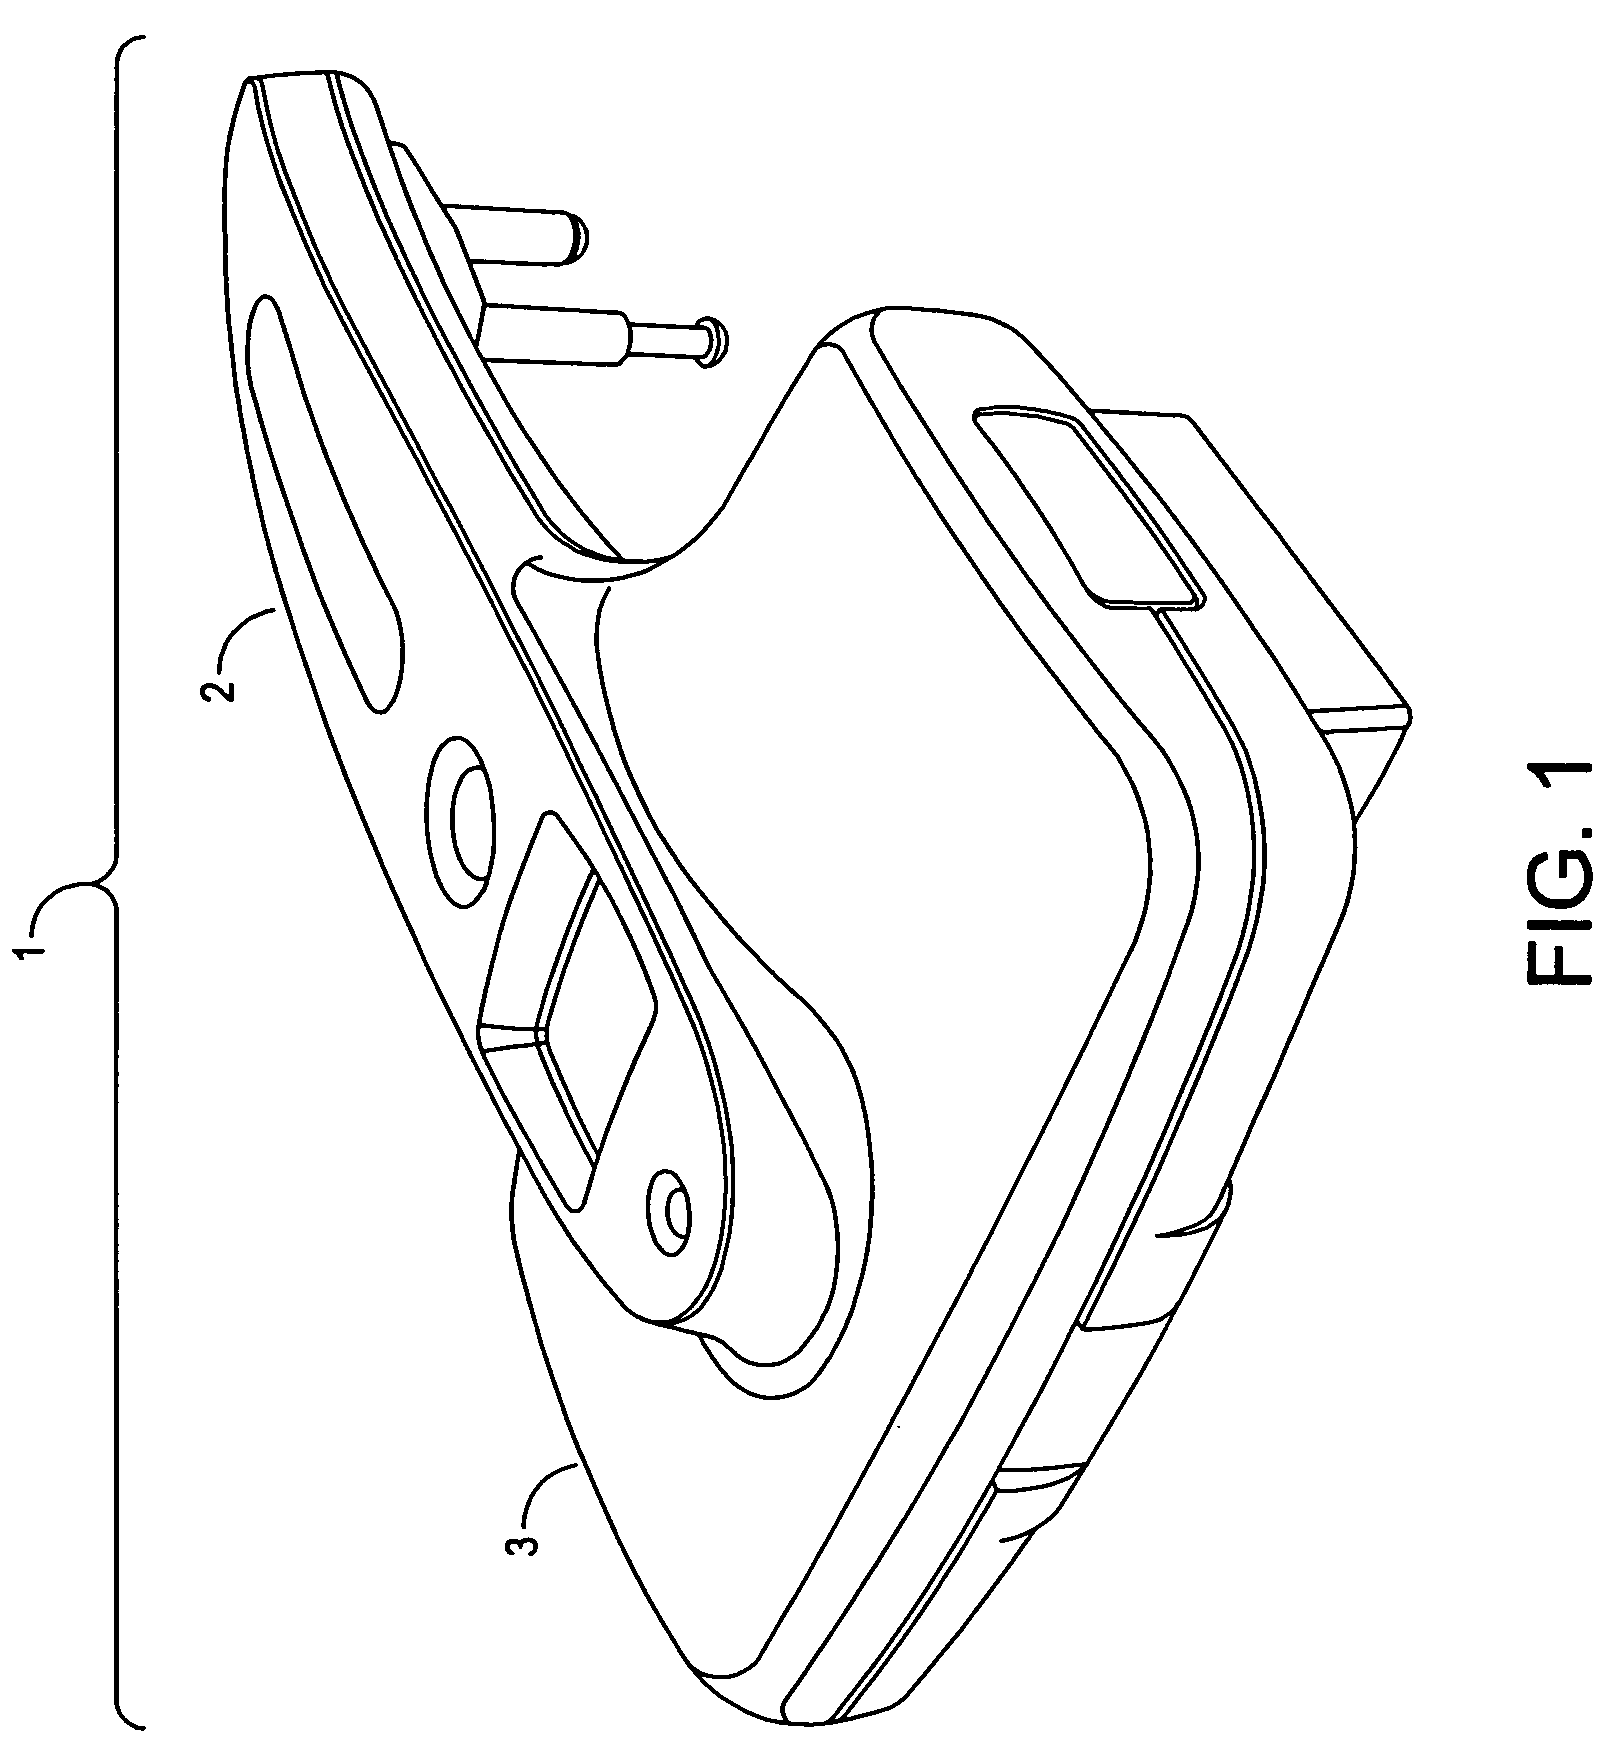 Apparatus and method for the automated measurement of sural nerve conduction velocity and amplitude